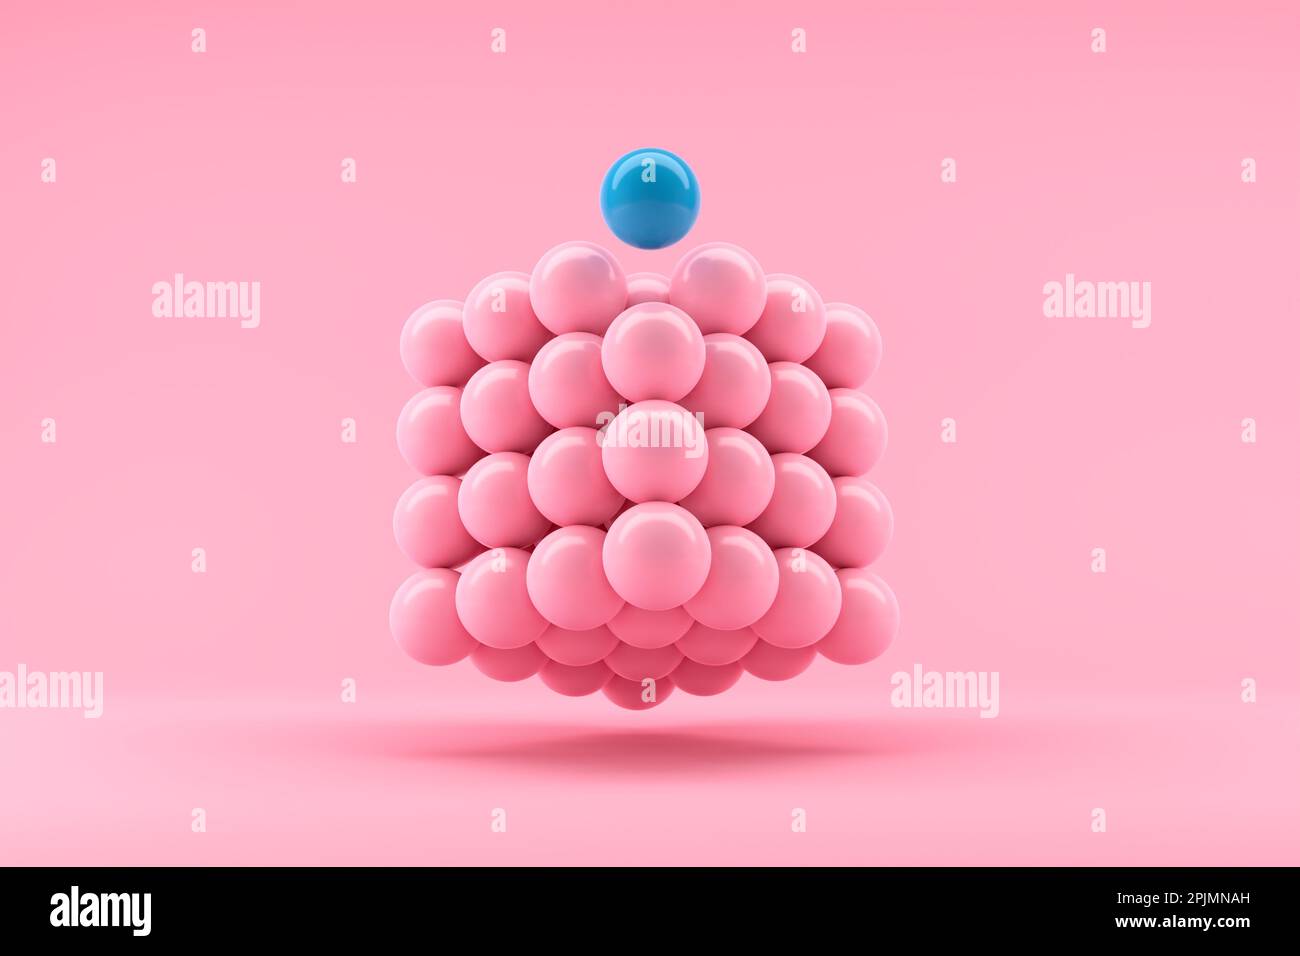 Teamwork, leadership, difference, individuality. Team organization and leading a team. Completing the whole. Blue ball stands out from the pink sphere Stock Photo